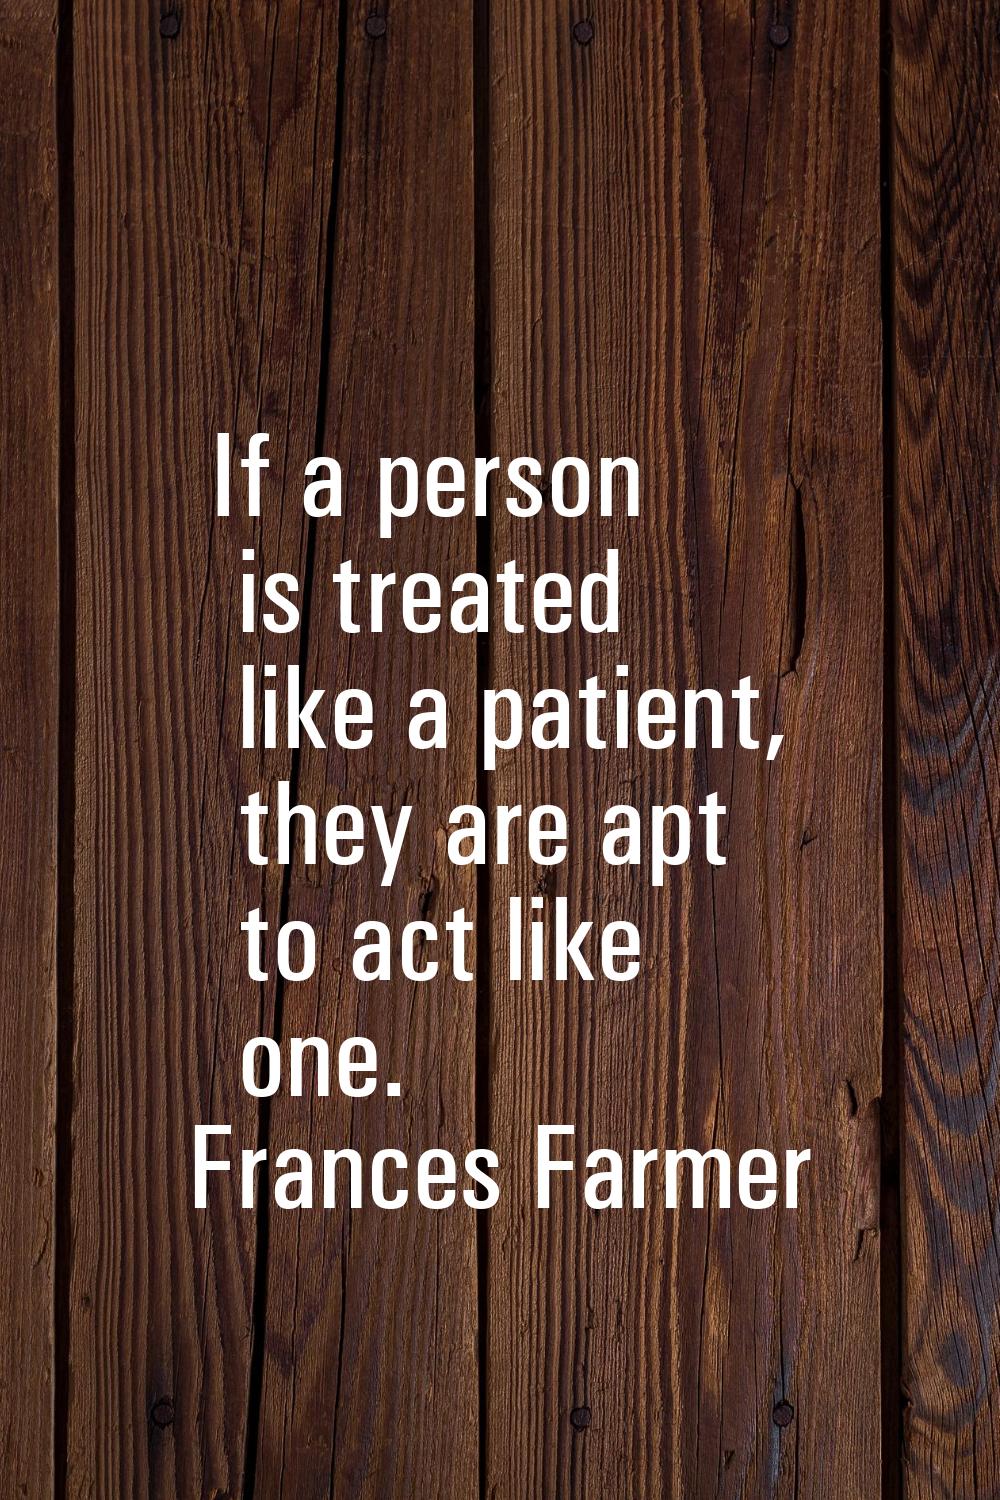 If a person is treated like a patient, they are apt to act like one.